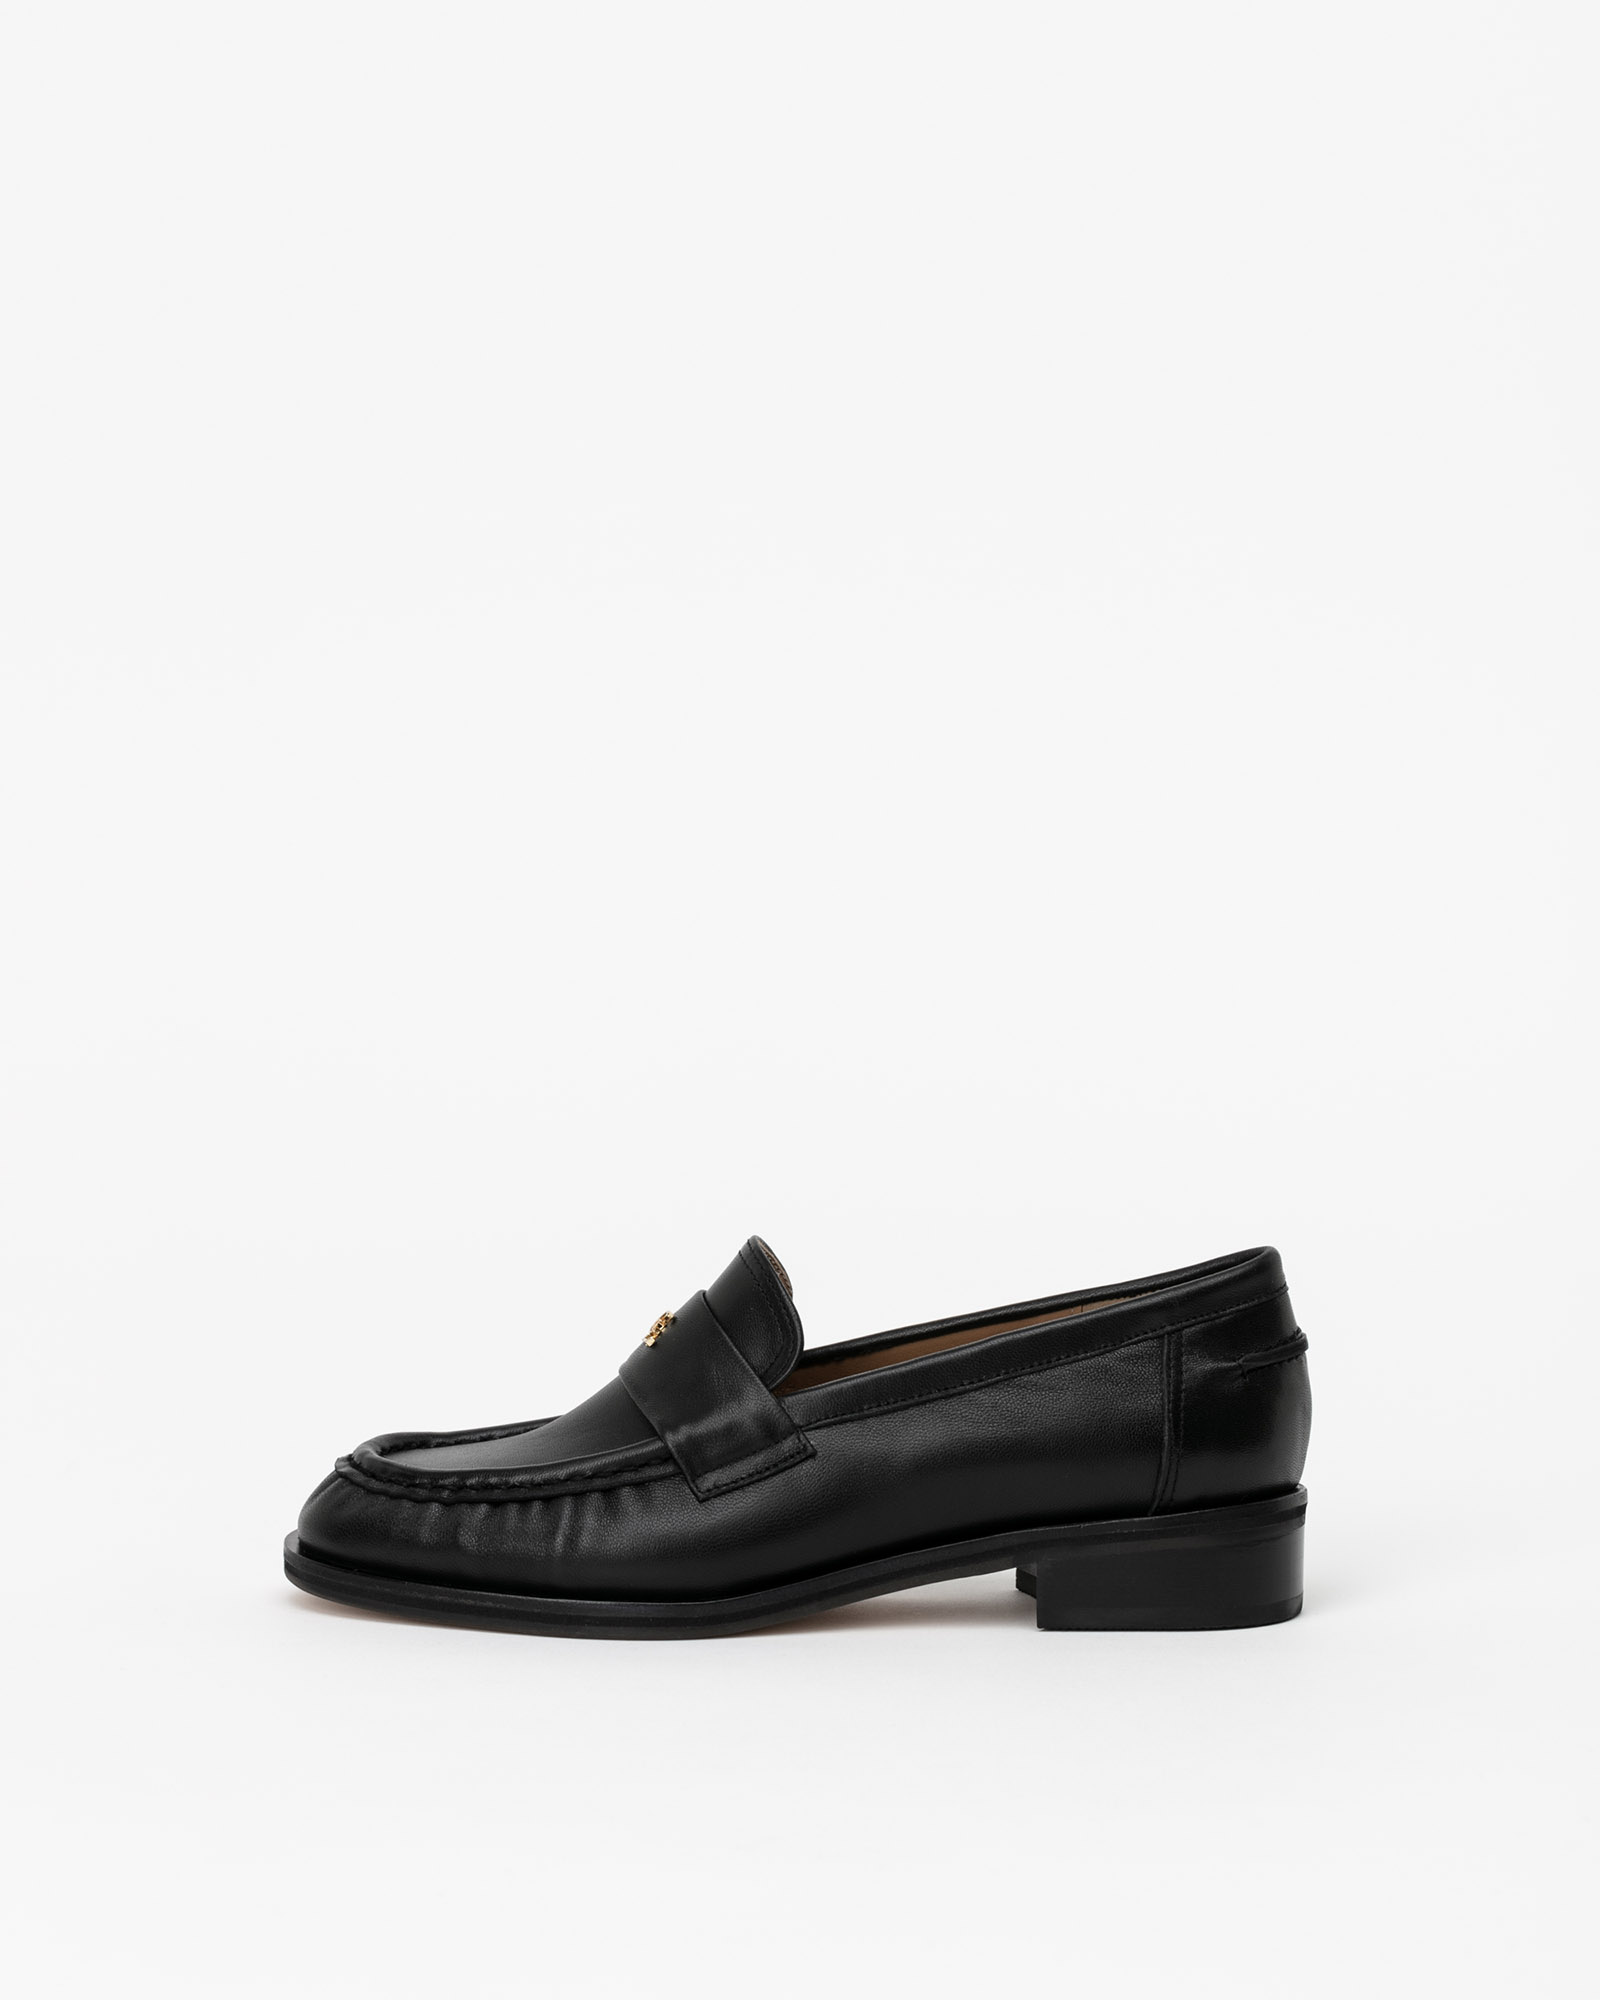 CL Soft Loafers